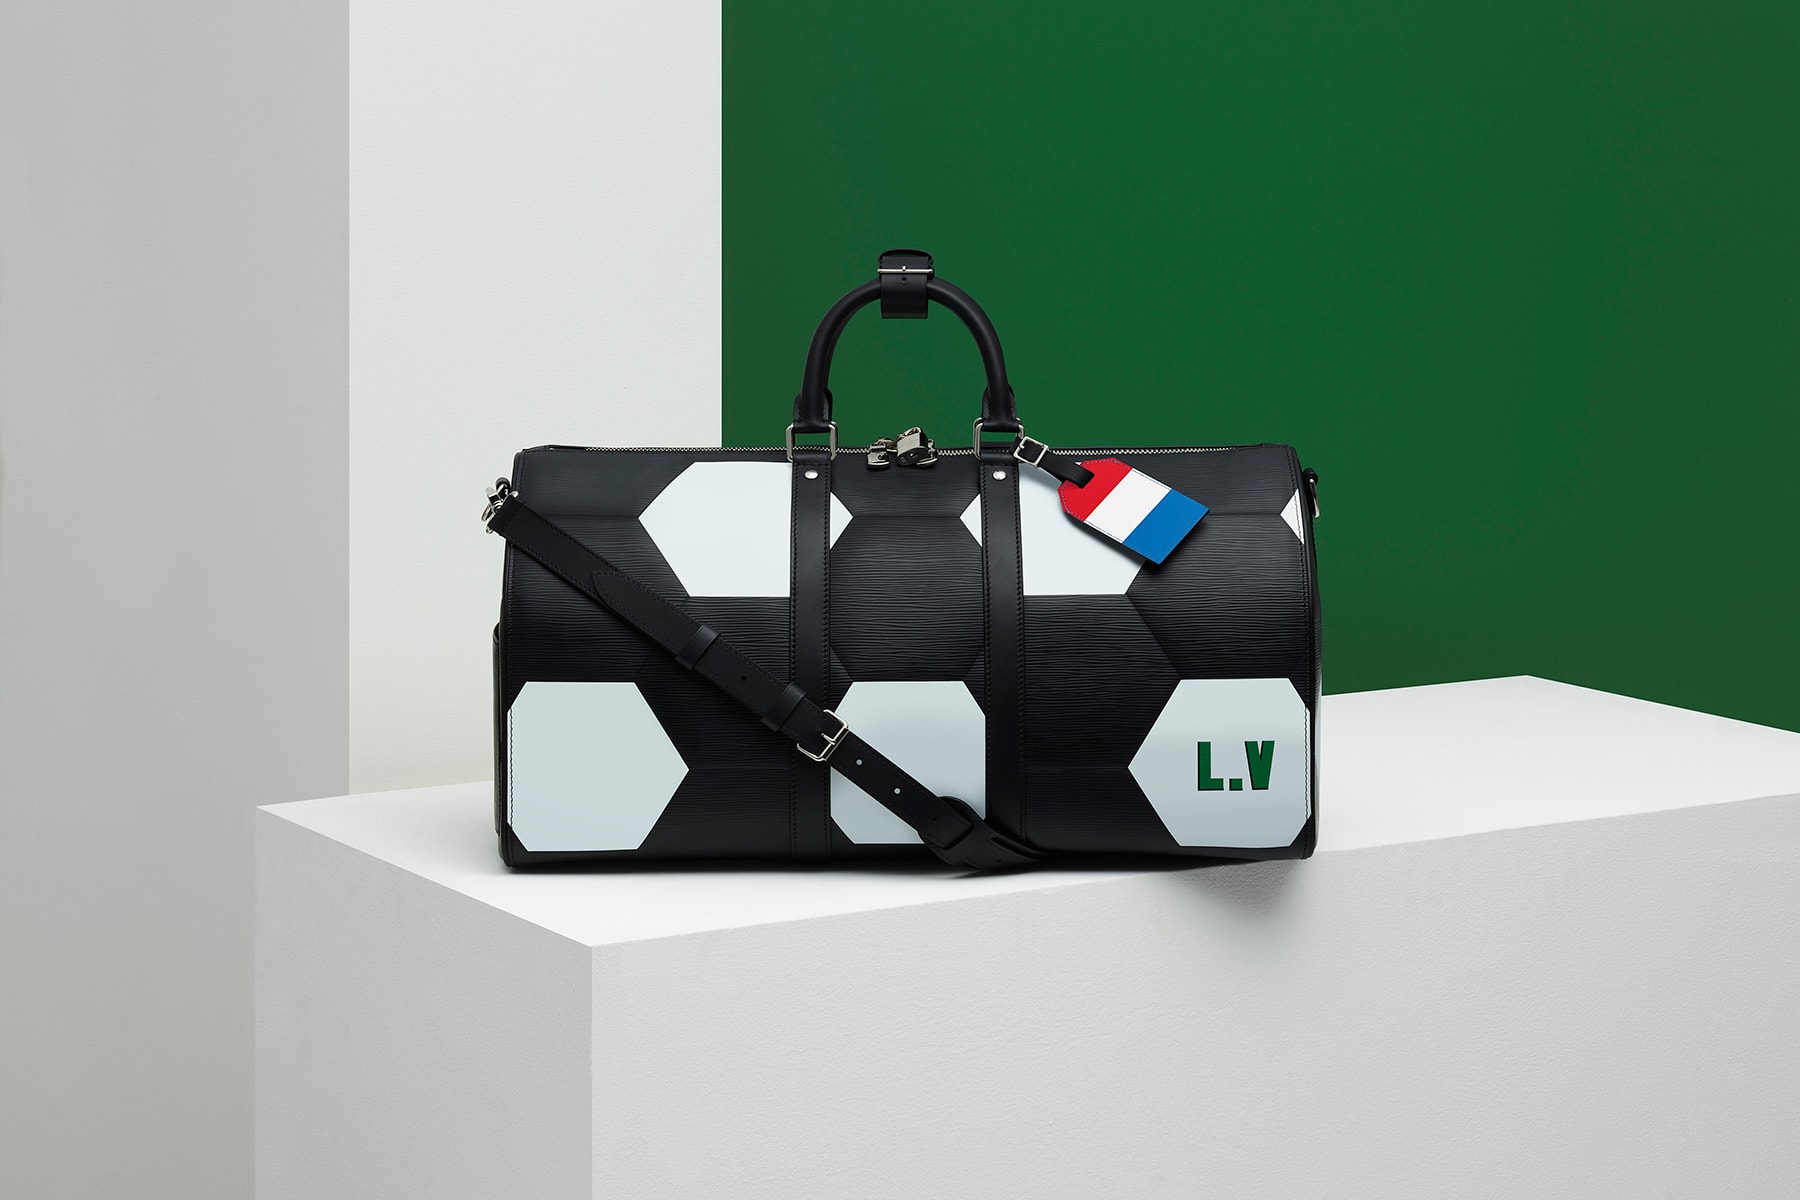 Louis Vuitton Fifa 2018 world cup collaboration luggage bag apollo keep all wallet leather goods epi soccer football branding flag luggage tag duffel laptop case black red white blue color customizable june 14 july 17 2018 limited edition exclusive drop release info